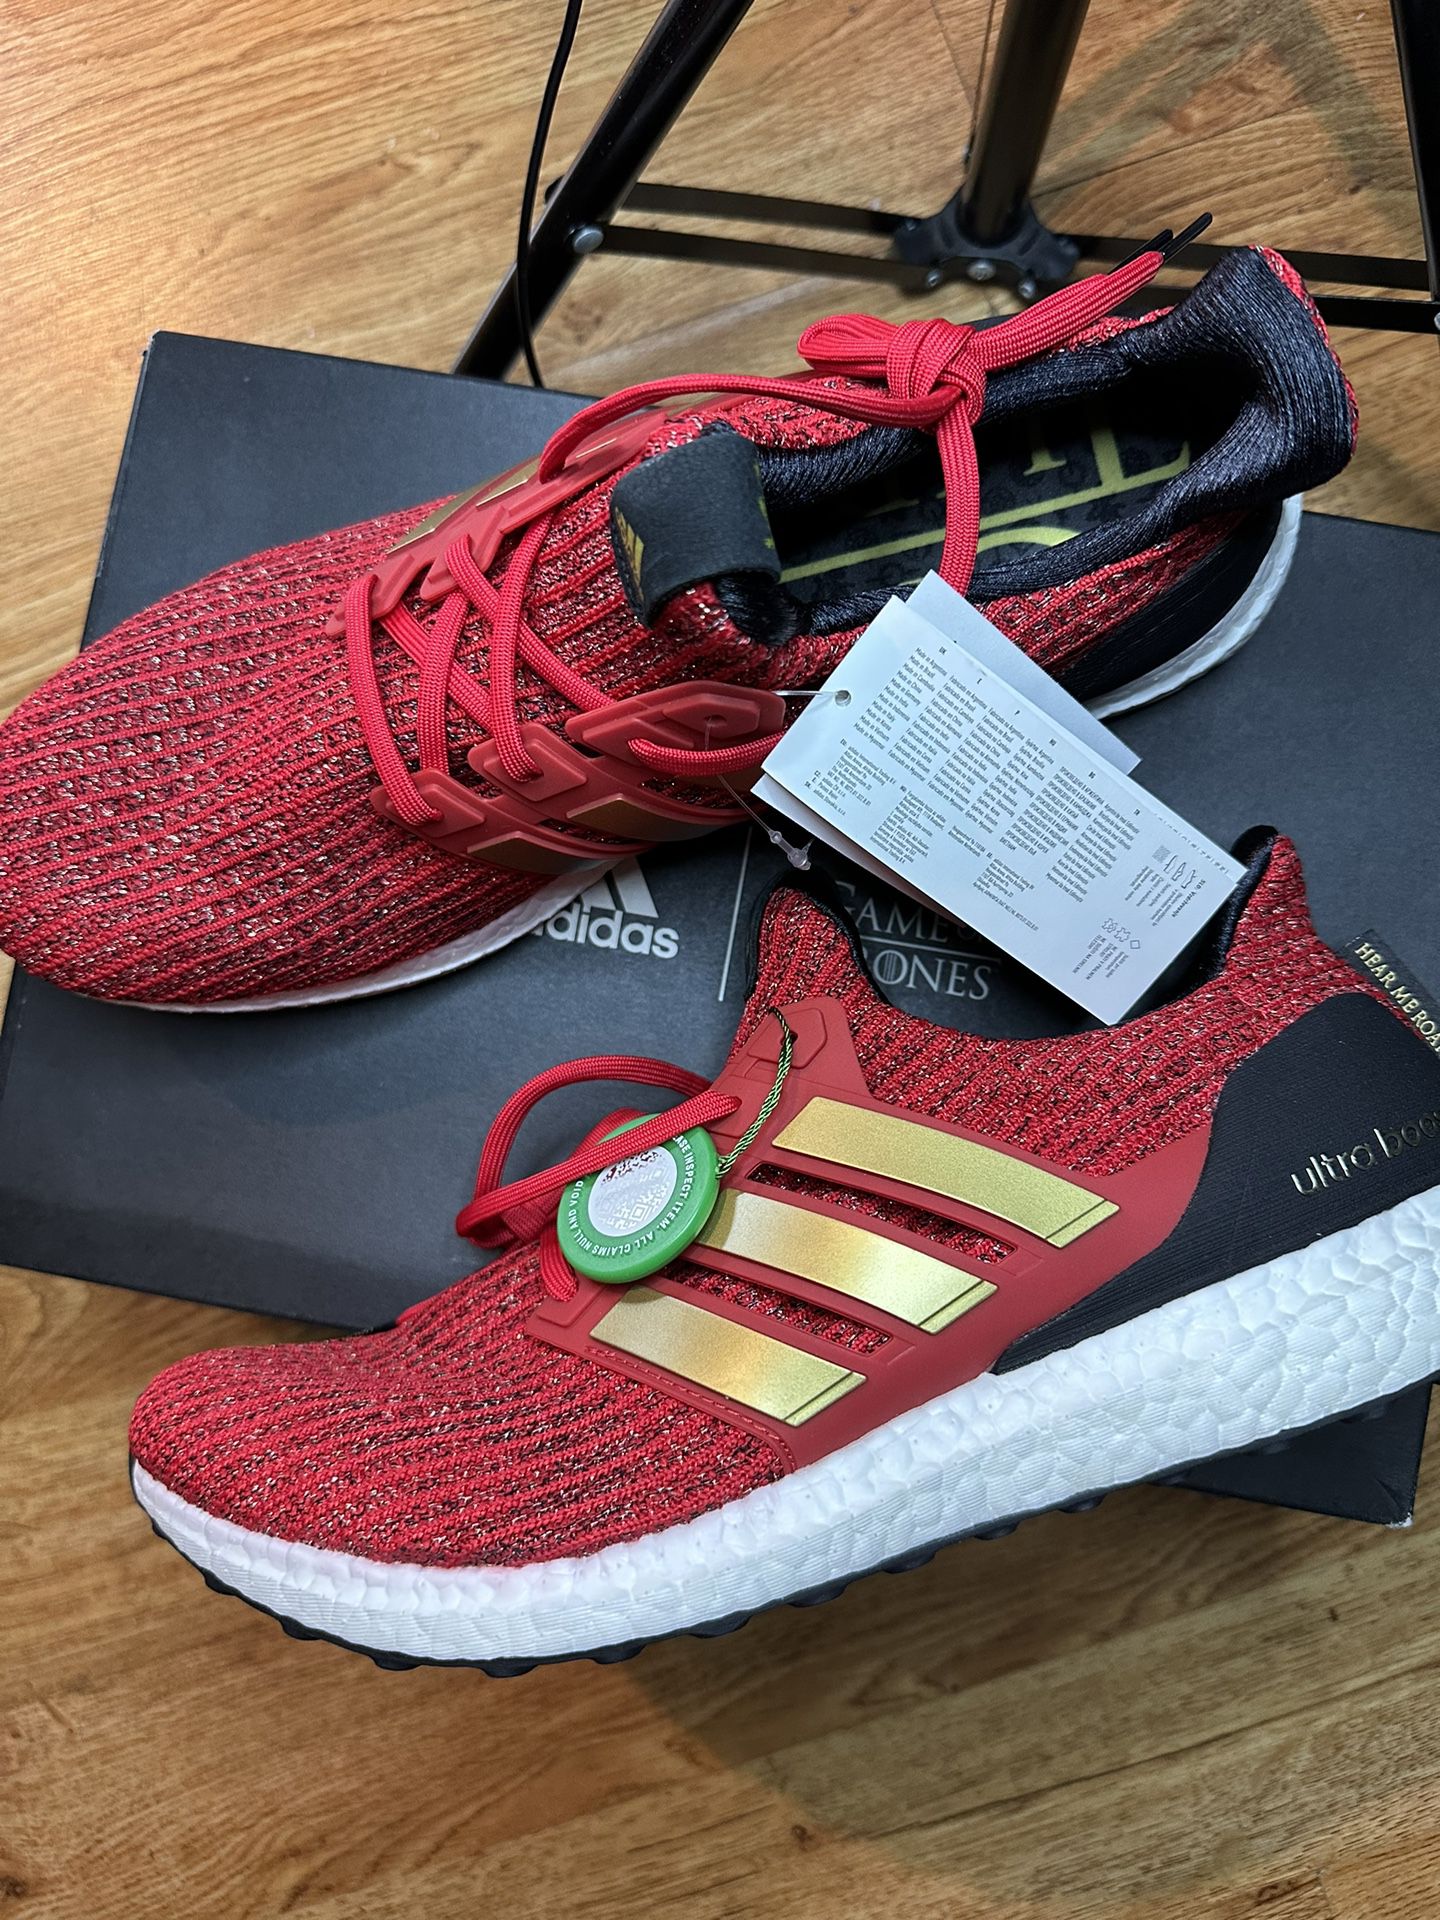 NEW Adidas ULTRA BOOST Game Of Thrones Size M / W 13.5 Lannister in Irwindale, CA OfferUp